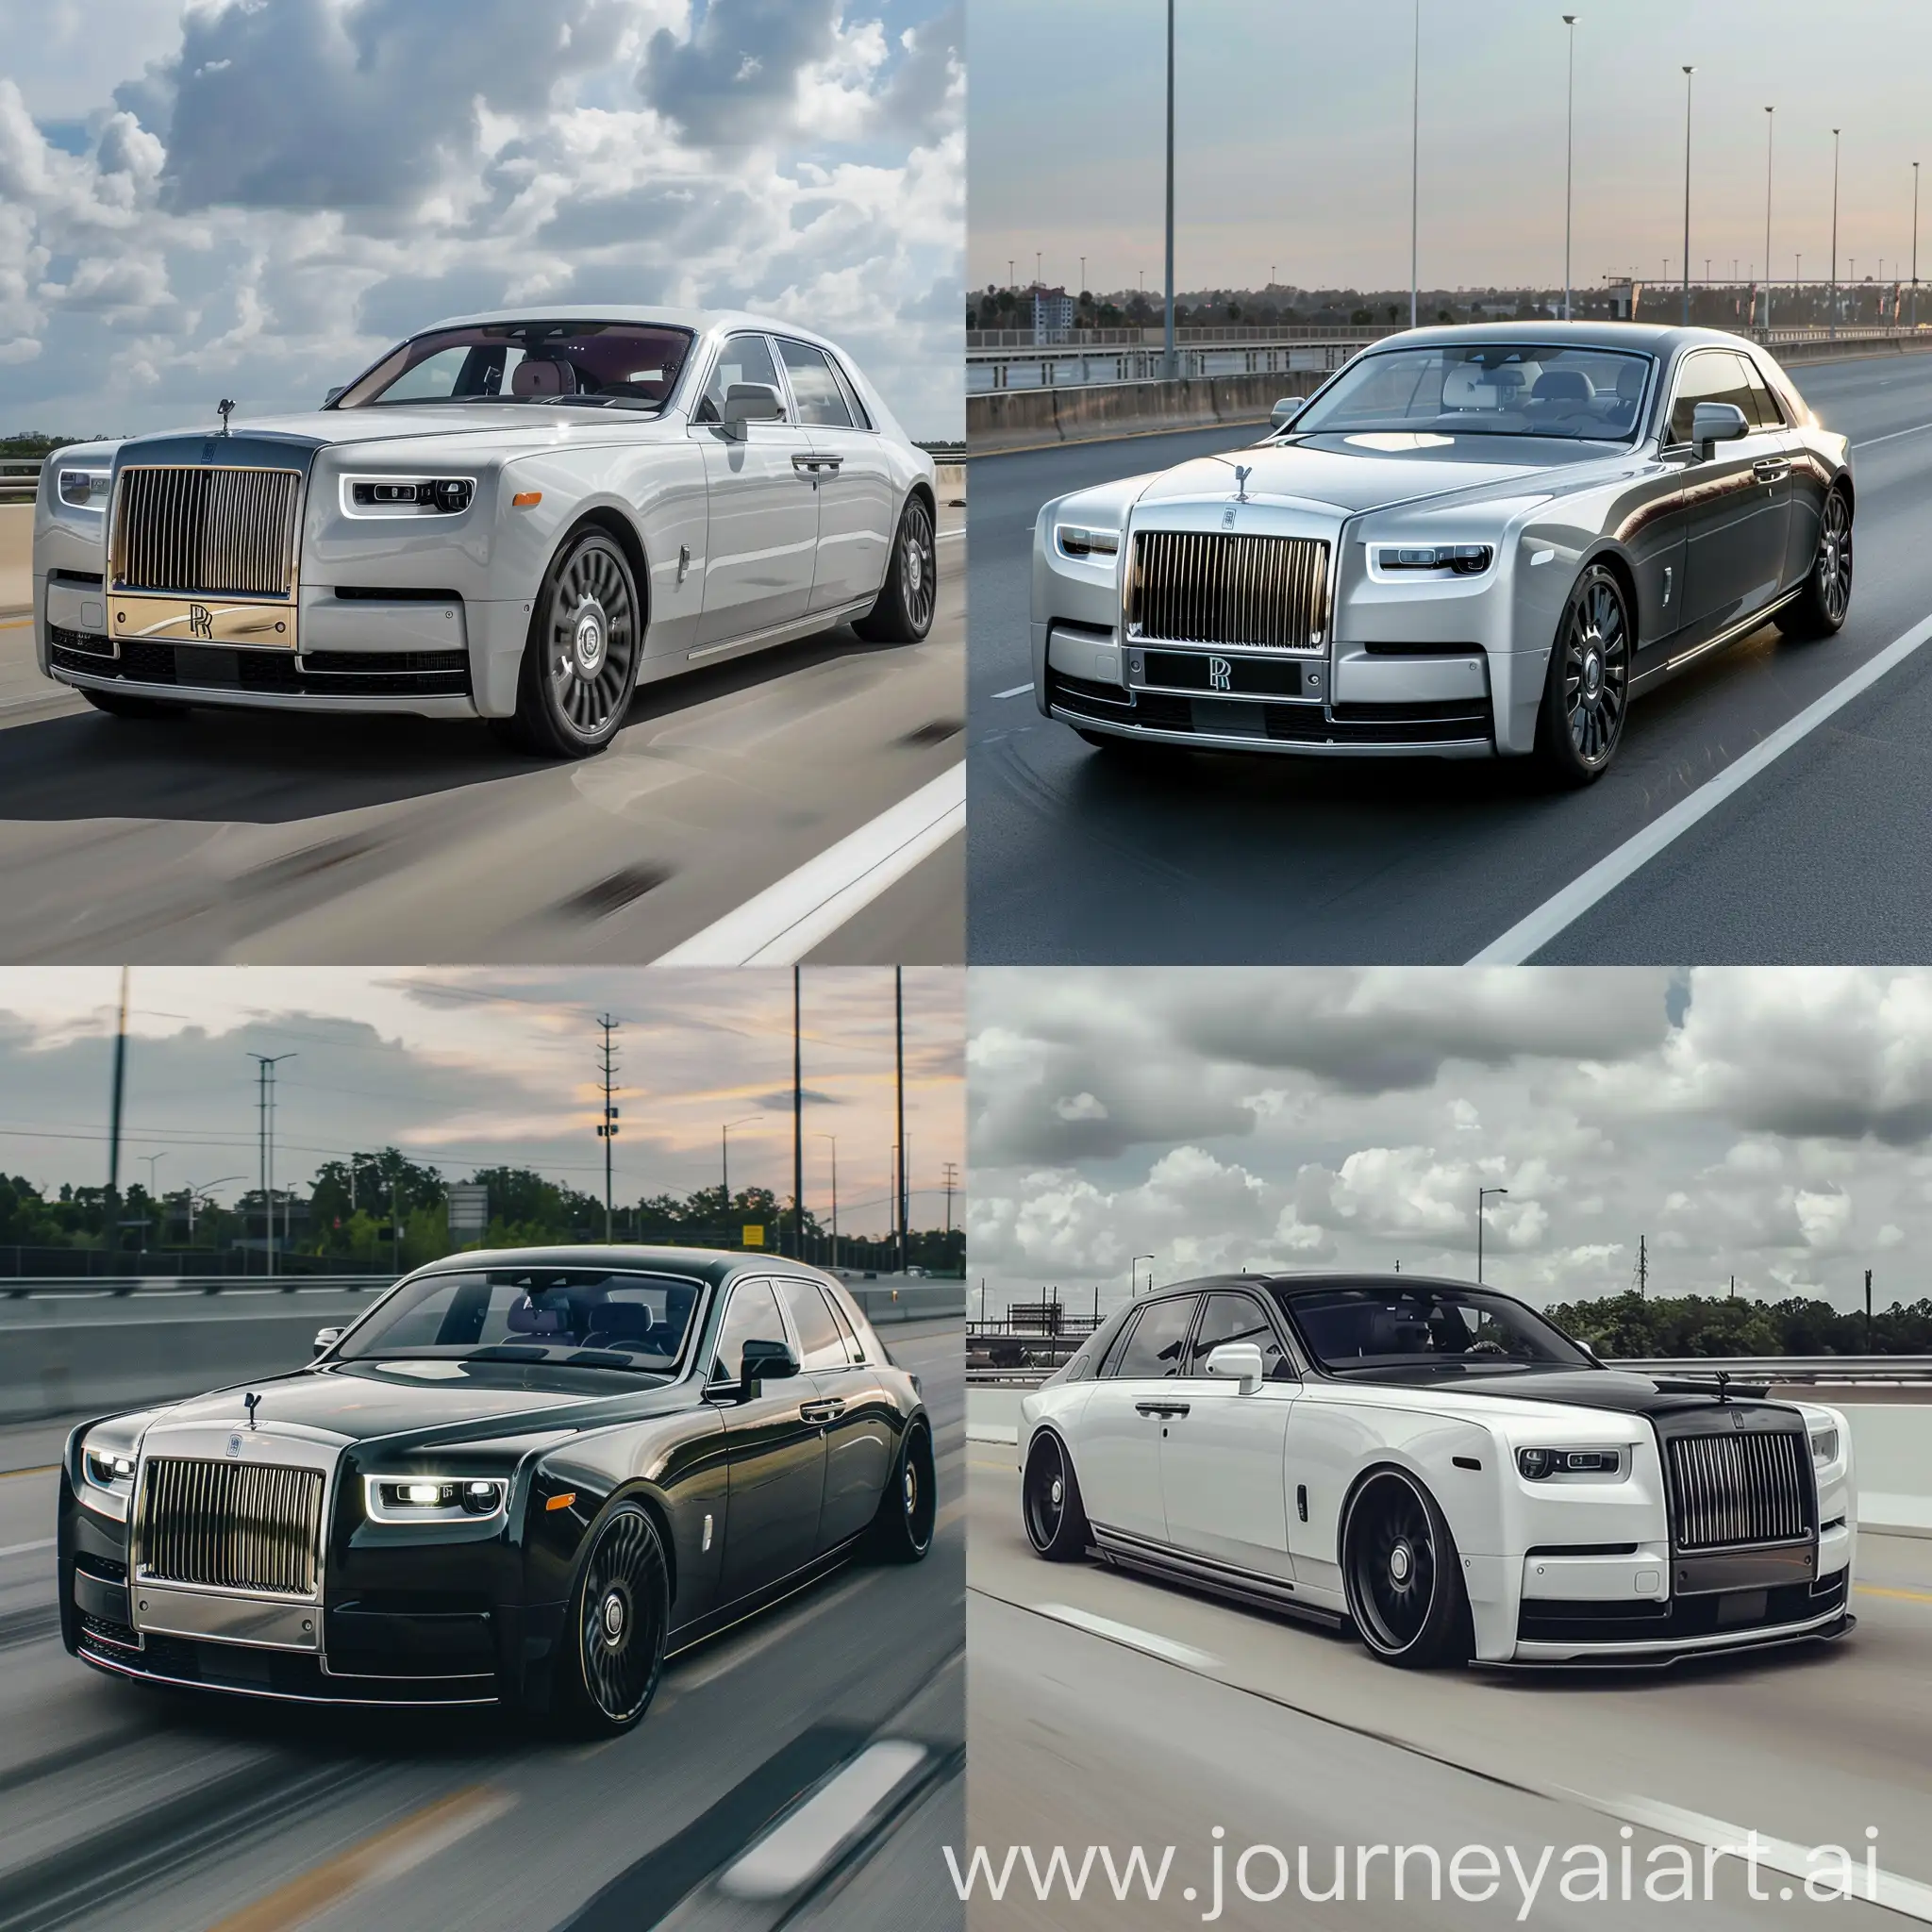 Rolls Royce Phantom with a front engine 2 door coupe in highway front side view